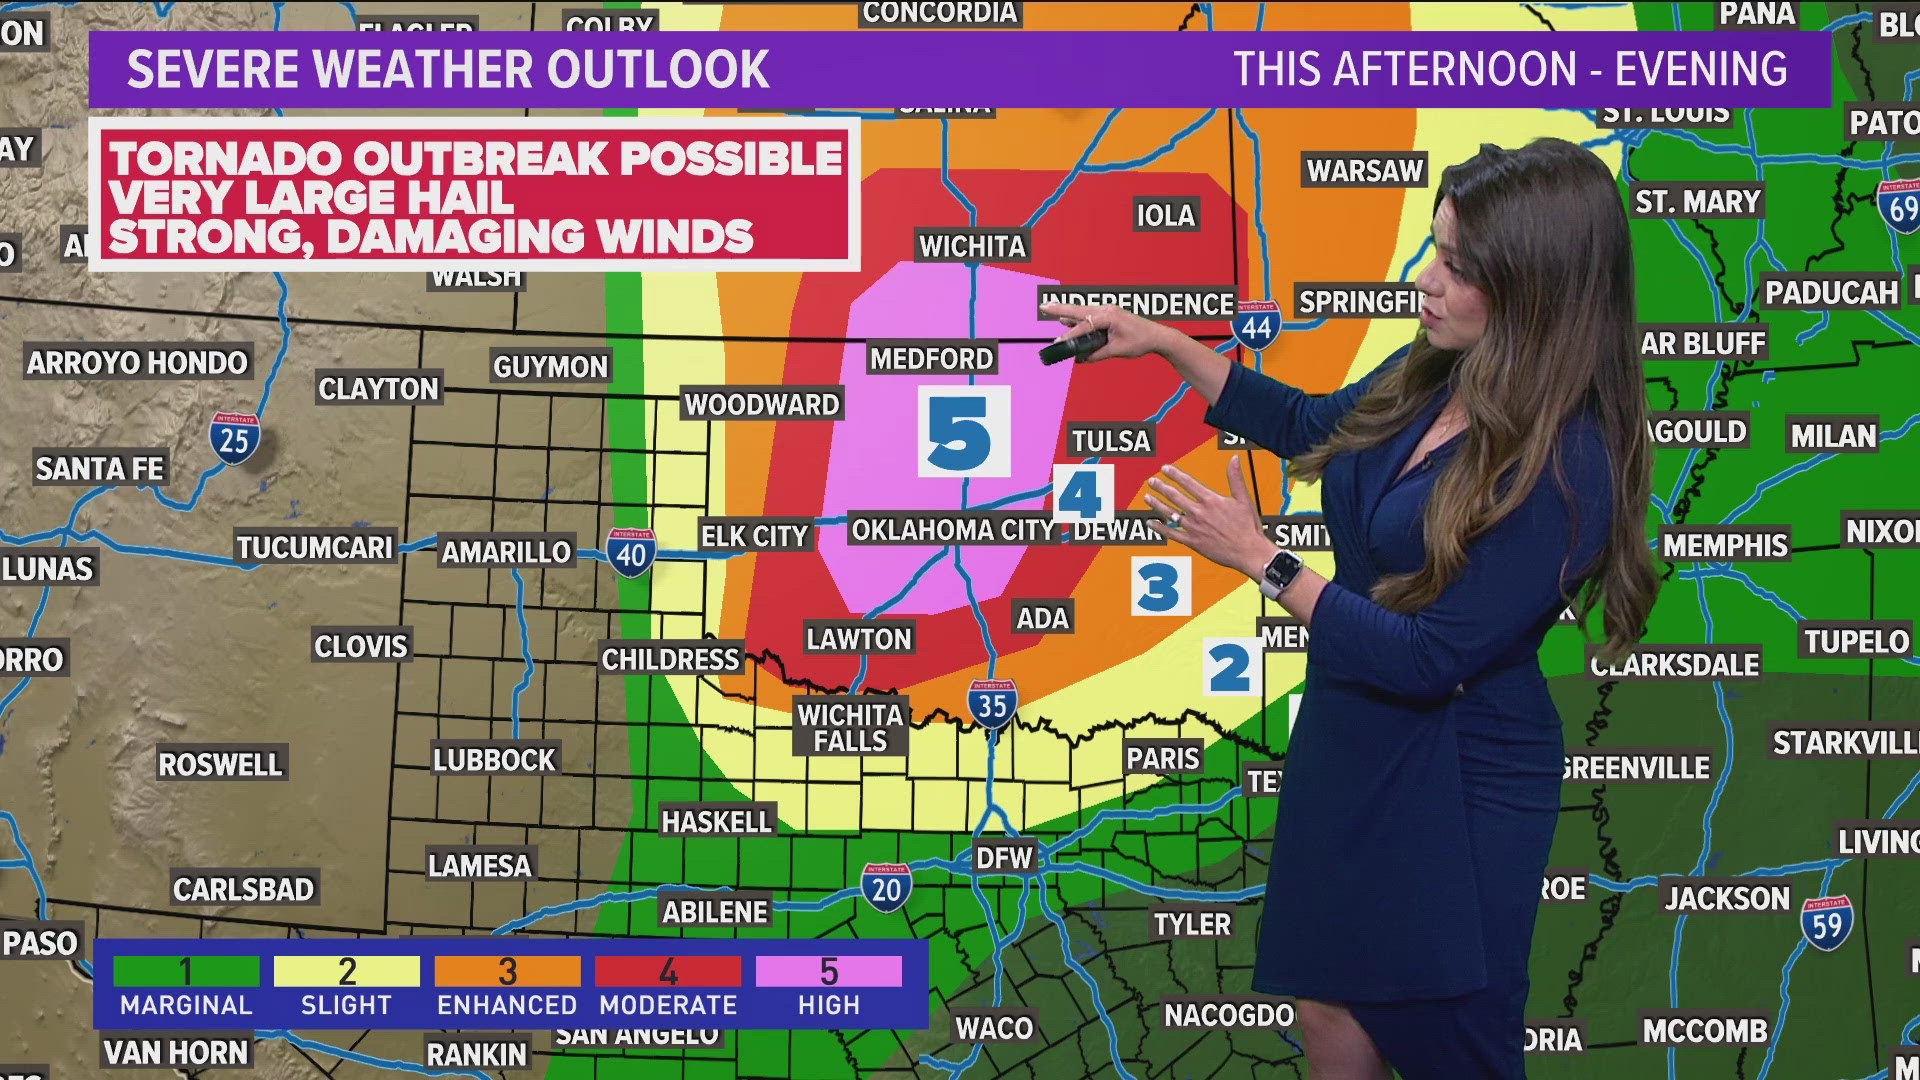 DFW Weather: Rare "high risk" level 5 out of 5 issued for Oklahoma. Lower threat for severe storms in North Texas.